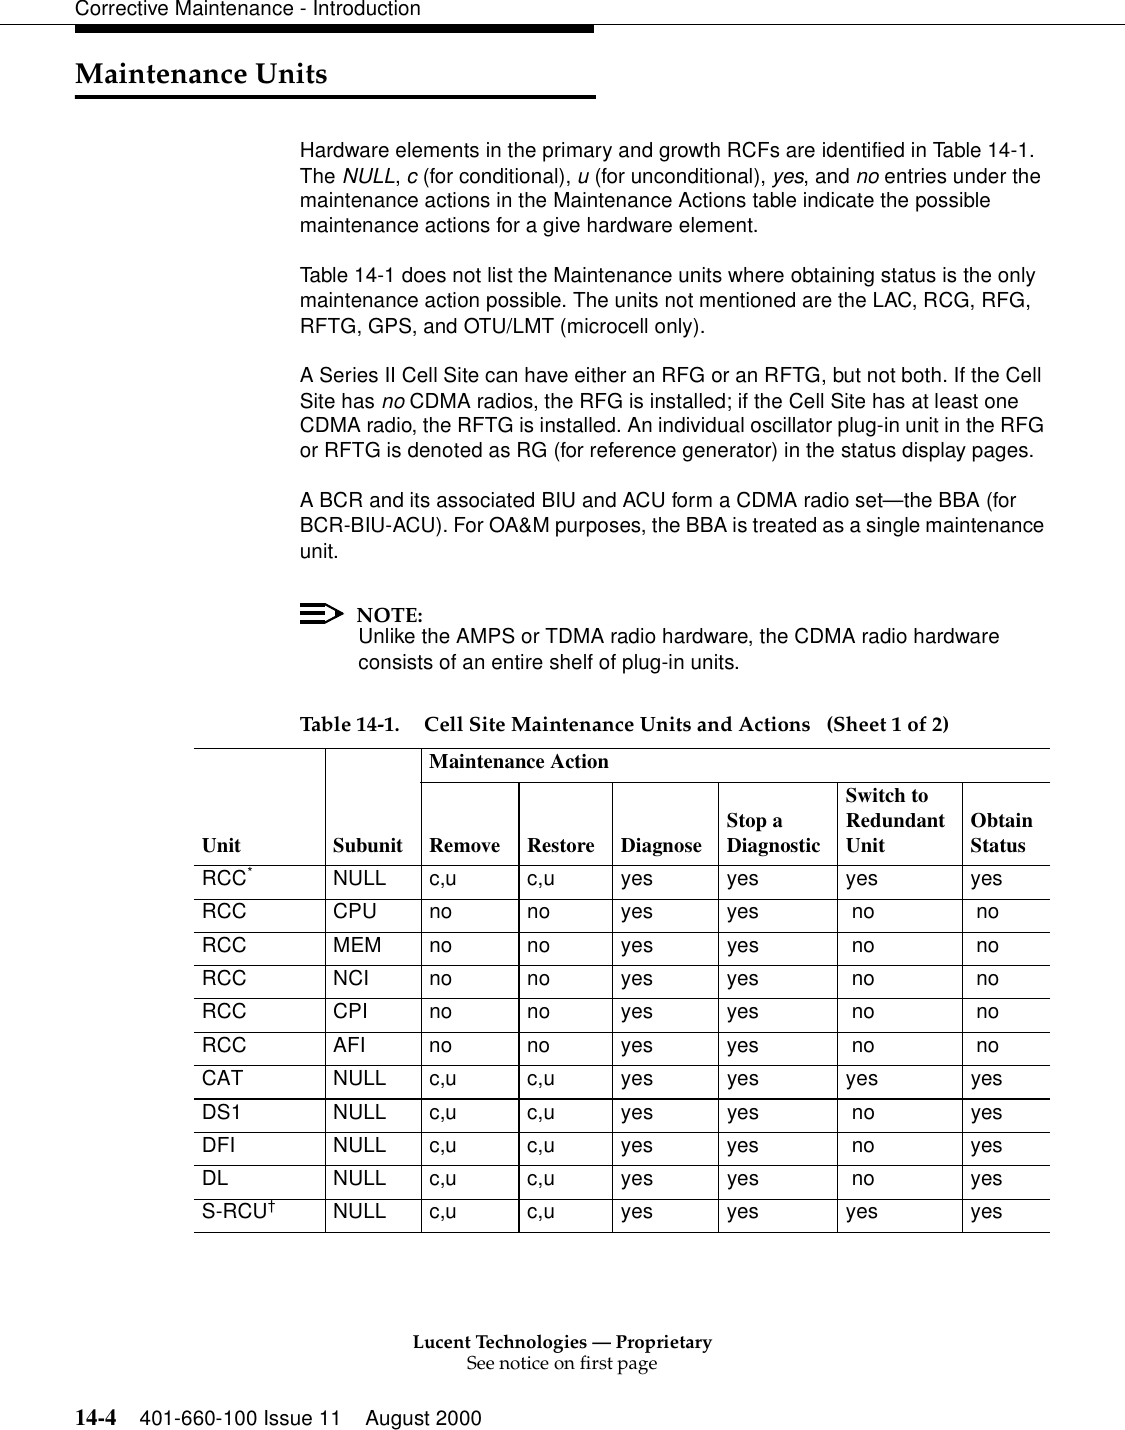 Lucent Technologies — ProprietarySee notice on first page14-4 401-660-100 Issue 11 August 2000Corrective Maintenance - IntroductionMaintenance UnitsHardware elements in the primary and growth RCFs are identified in Table 14-1. The NULL, c (for conditional), u (for unconditional), yes, and no entries under the maintenance actions in the Maintenance Actions table indicate the possible maintenance actions for a give hardware element.Table 14-1 does not list the Maintenance units where obtaining status is the only maintenance action possible. The units not mentioned are the LAC, RCG, RFG, RFTG, GPS, and OTU/LMT (microcell only).A Series II Cell Site can have either an RFG or an RFTG, but not both. If the Cell Site has no CDMA radios, the RFG is installed; if the Cell Site has at least one CDMA radio, the RFTG is installed. An individual oscillator plug-in unit in the RFG or RFTG is denoted as RG (for reference generator) in the status display pages.A BCR and its associated BIU and ACU form a CDMA radio set—the BBA (for BCR-BIU-ACU). For OA&amp;M purposes, the BBA is treated as a single maintenance unit.NOTE:Unlike the AMPS or TDMA radio hardware, the CDMA radio hardware consists of an entire shelf of plug-in units.    Table 14-1. Cell Site Maintenance Units and Actions   (Sheet 1 of 2)Unit SubunitMaintenance ActionRemove Restore Diagnose Stop aDiagnosticSwitch to Redundant Unit ObtainStatusRCC*NULL c,u c,u yes yes yes yesRCC CPU no no yes yes  no  noRCC MEM no no yes yes  no  noRCC NCI no no yes yes  no  noRCC CPI no no yes yes  no  noRCC AFI no no yes yes  no  noCAT NULL c,u c,u yes yes yes yesDS1 NULL c,u c,u yes yes  no yesDFI NULL c,u c,u yes yes  no yesDL NULL c,u c,u yes yes  no yesS-RCU†NULL c,u c,u yes yes yes yes